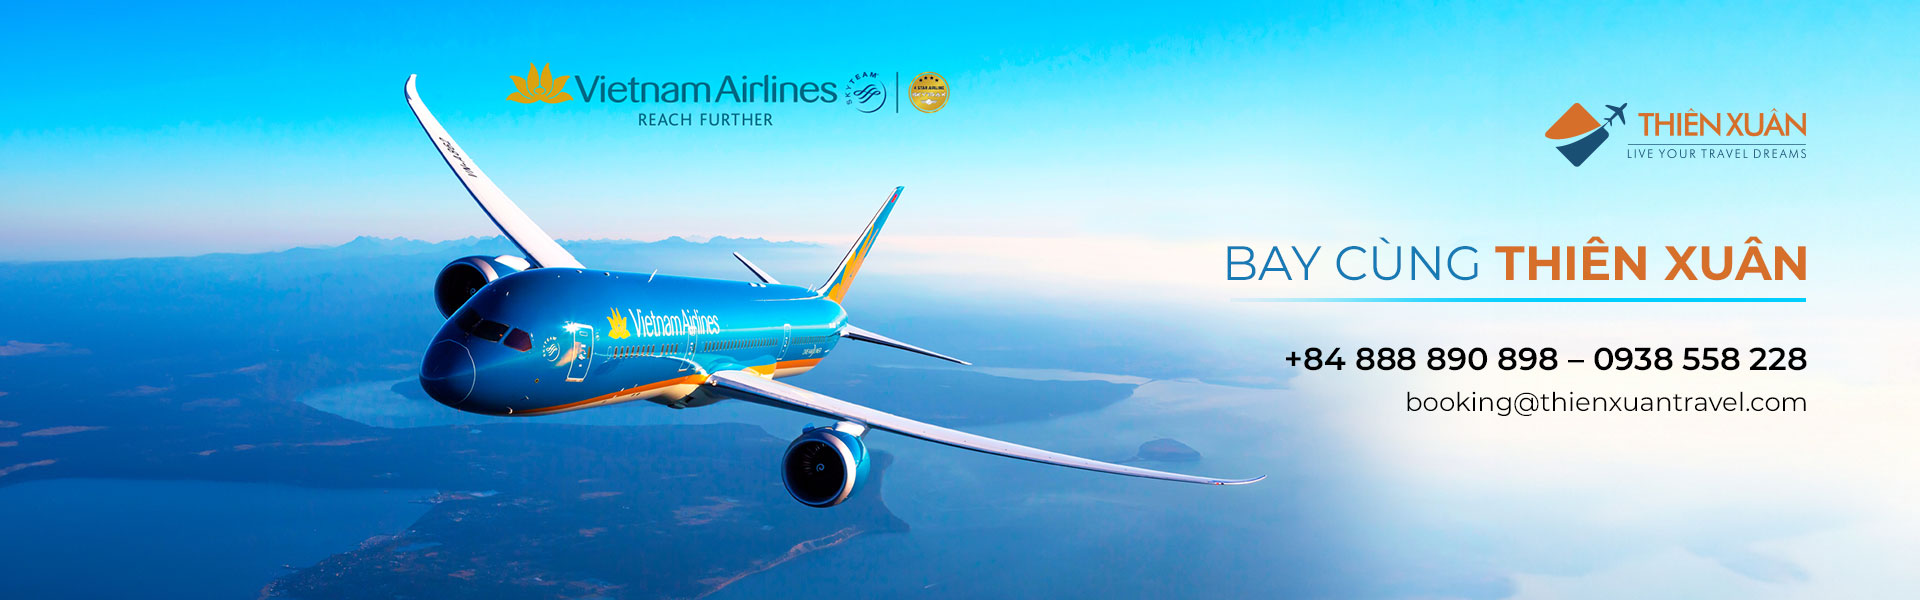 Thiên Xuân Travel – Live your travel dreams and flight with Vietnam Airlines